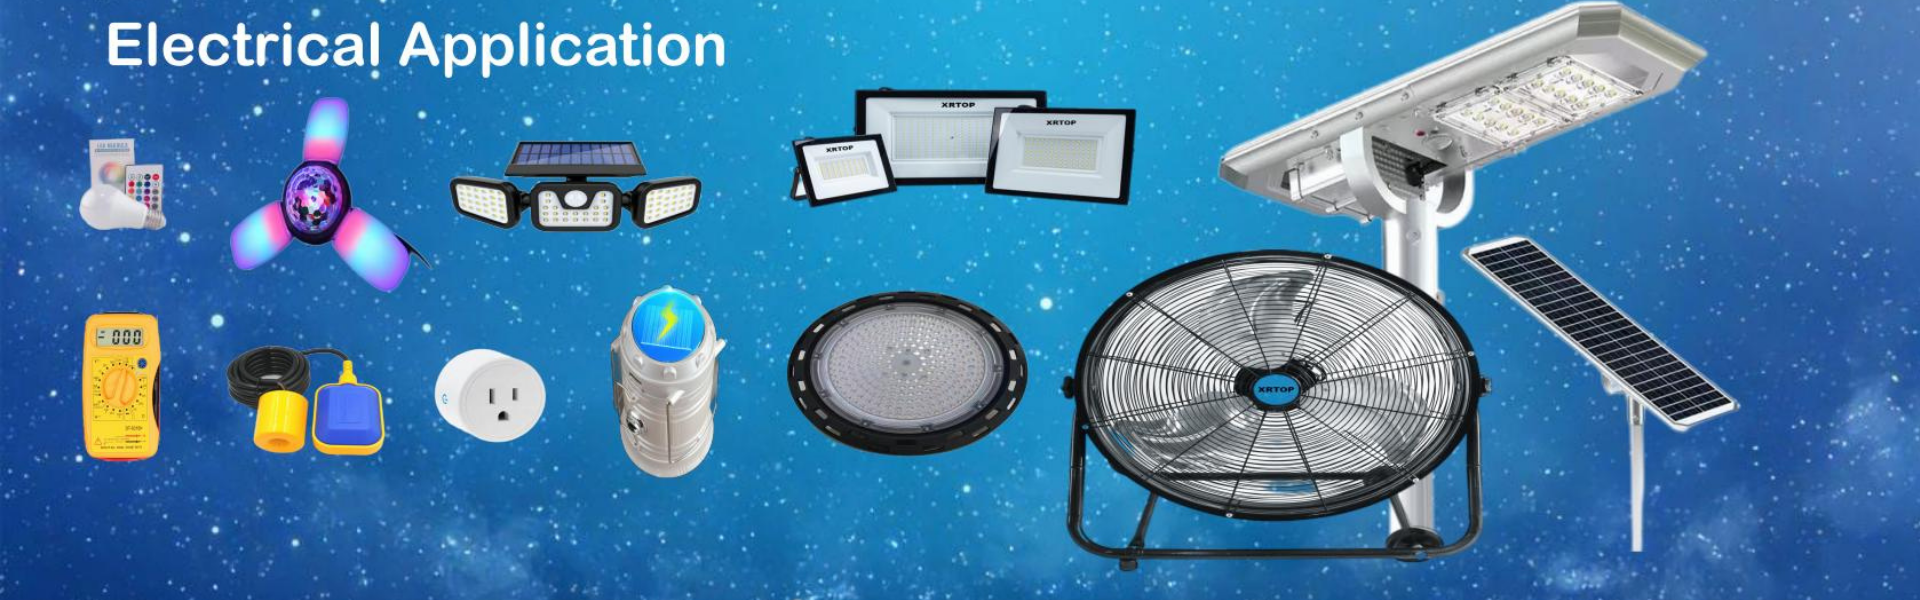 Huzhou xrtop specializes in outdoor LED lights, solar lights, night lights, fans, intelligent switches